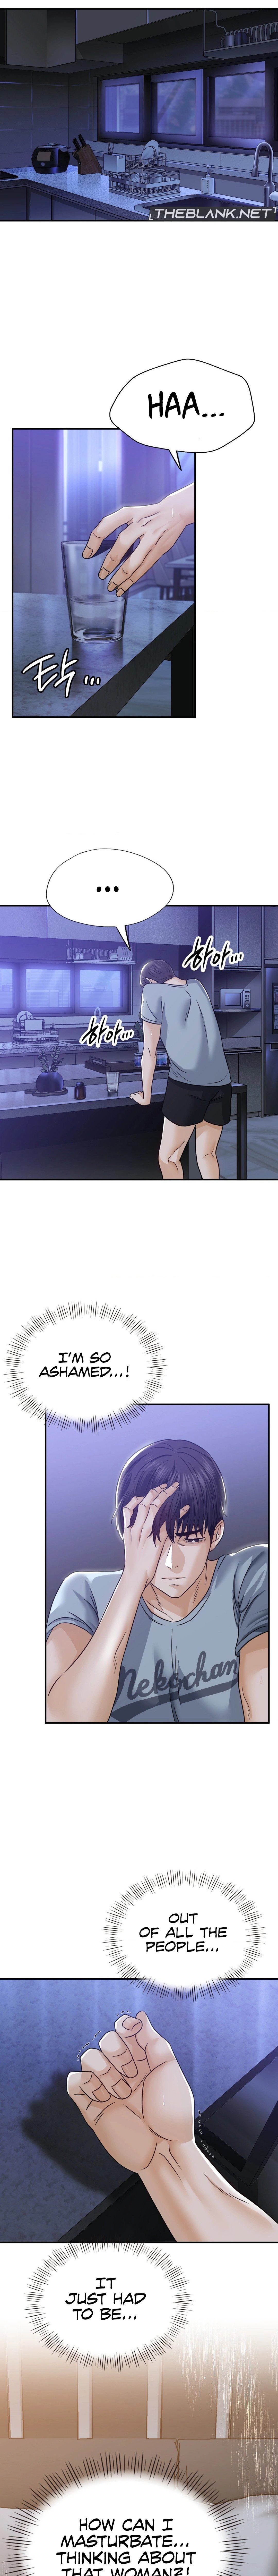 stepmothers-past-chap-2-1